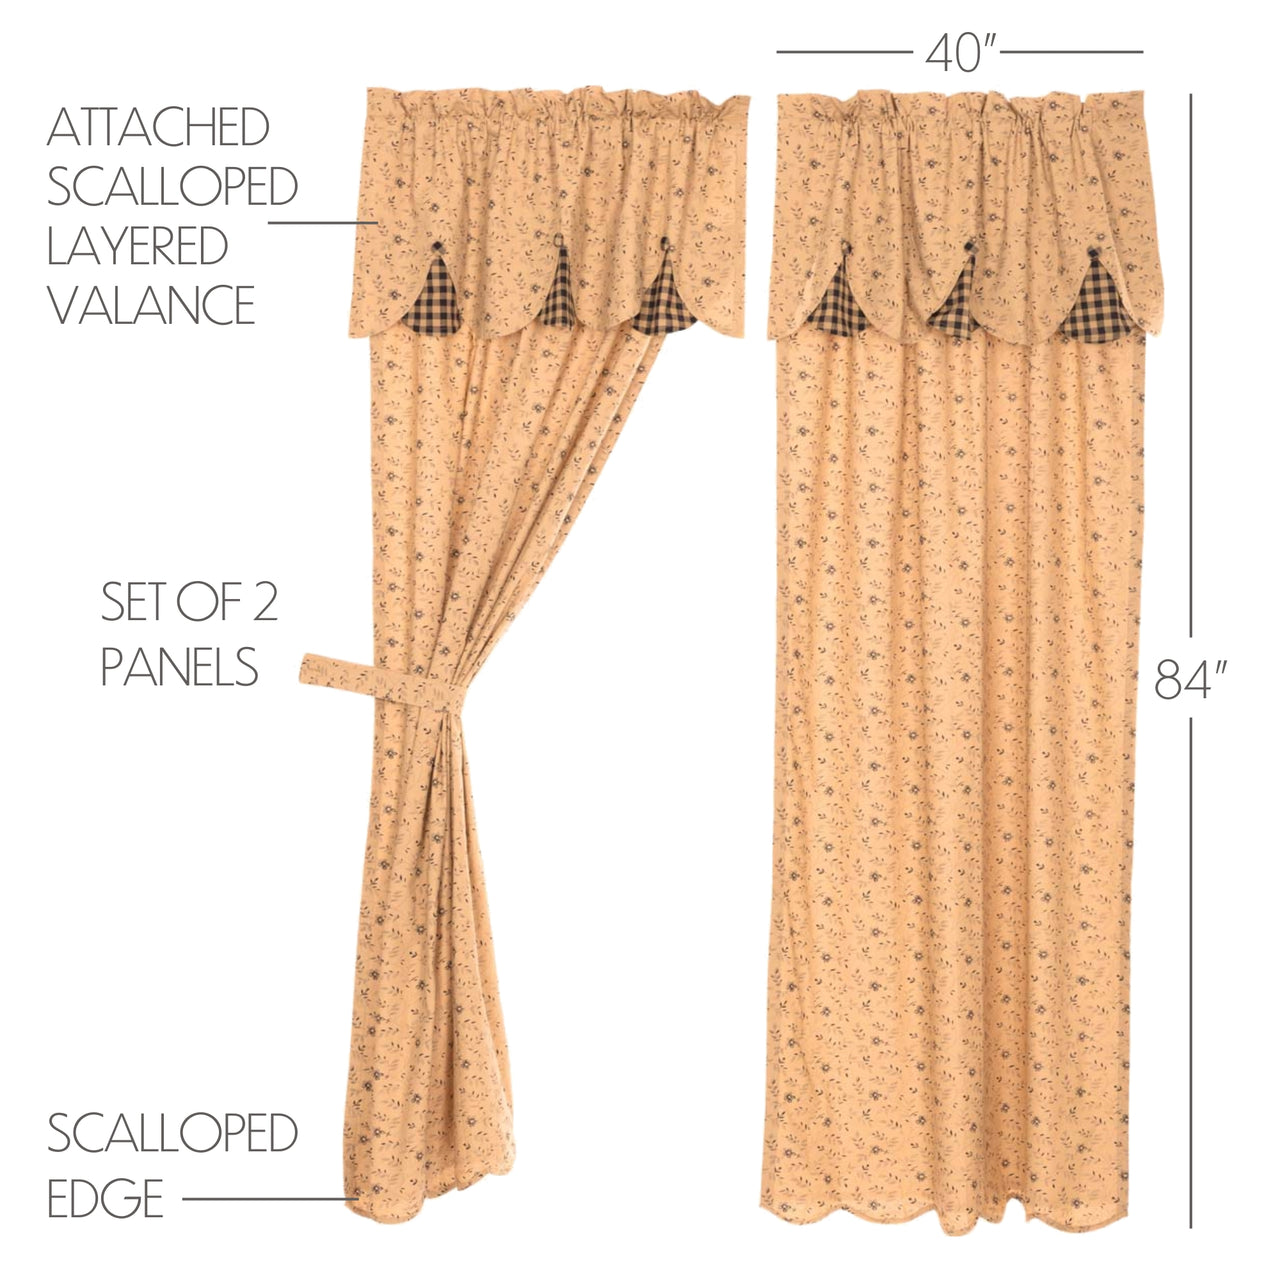 Maisie Panel Curtain with Attached Scalloped Layered Valance Country Style Curtain Set of 2 84"x40"